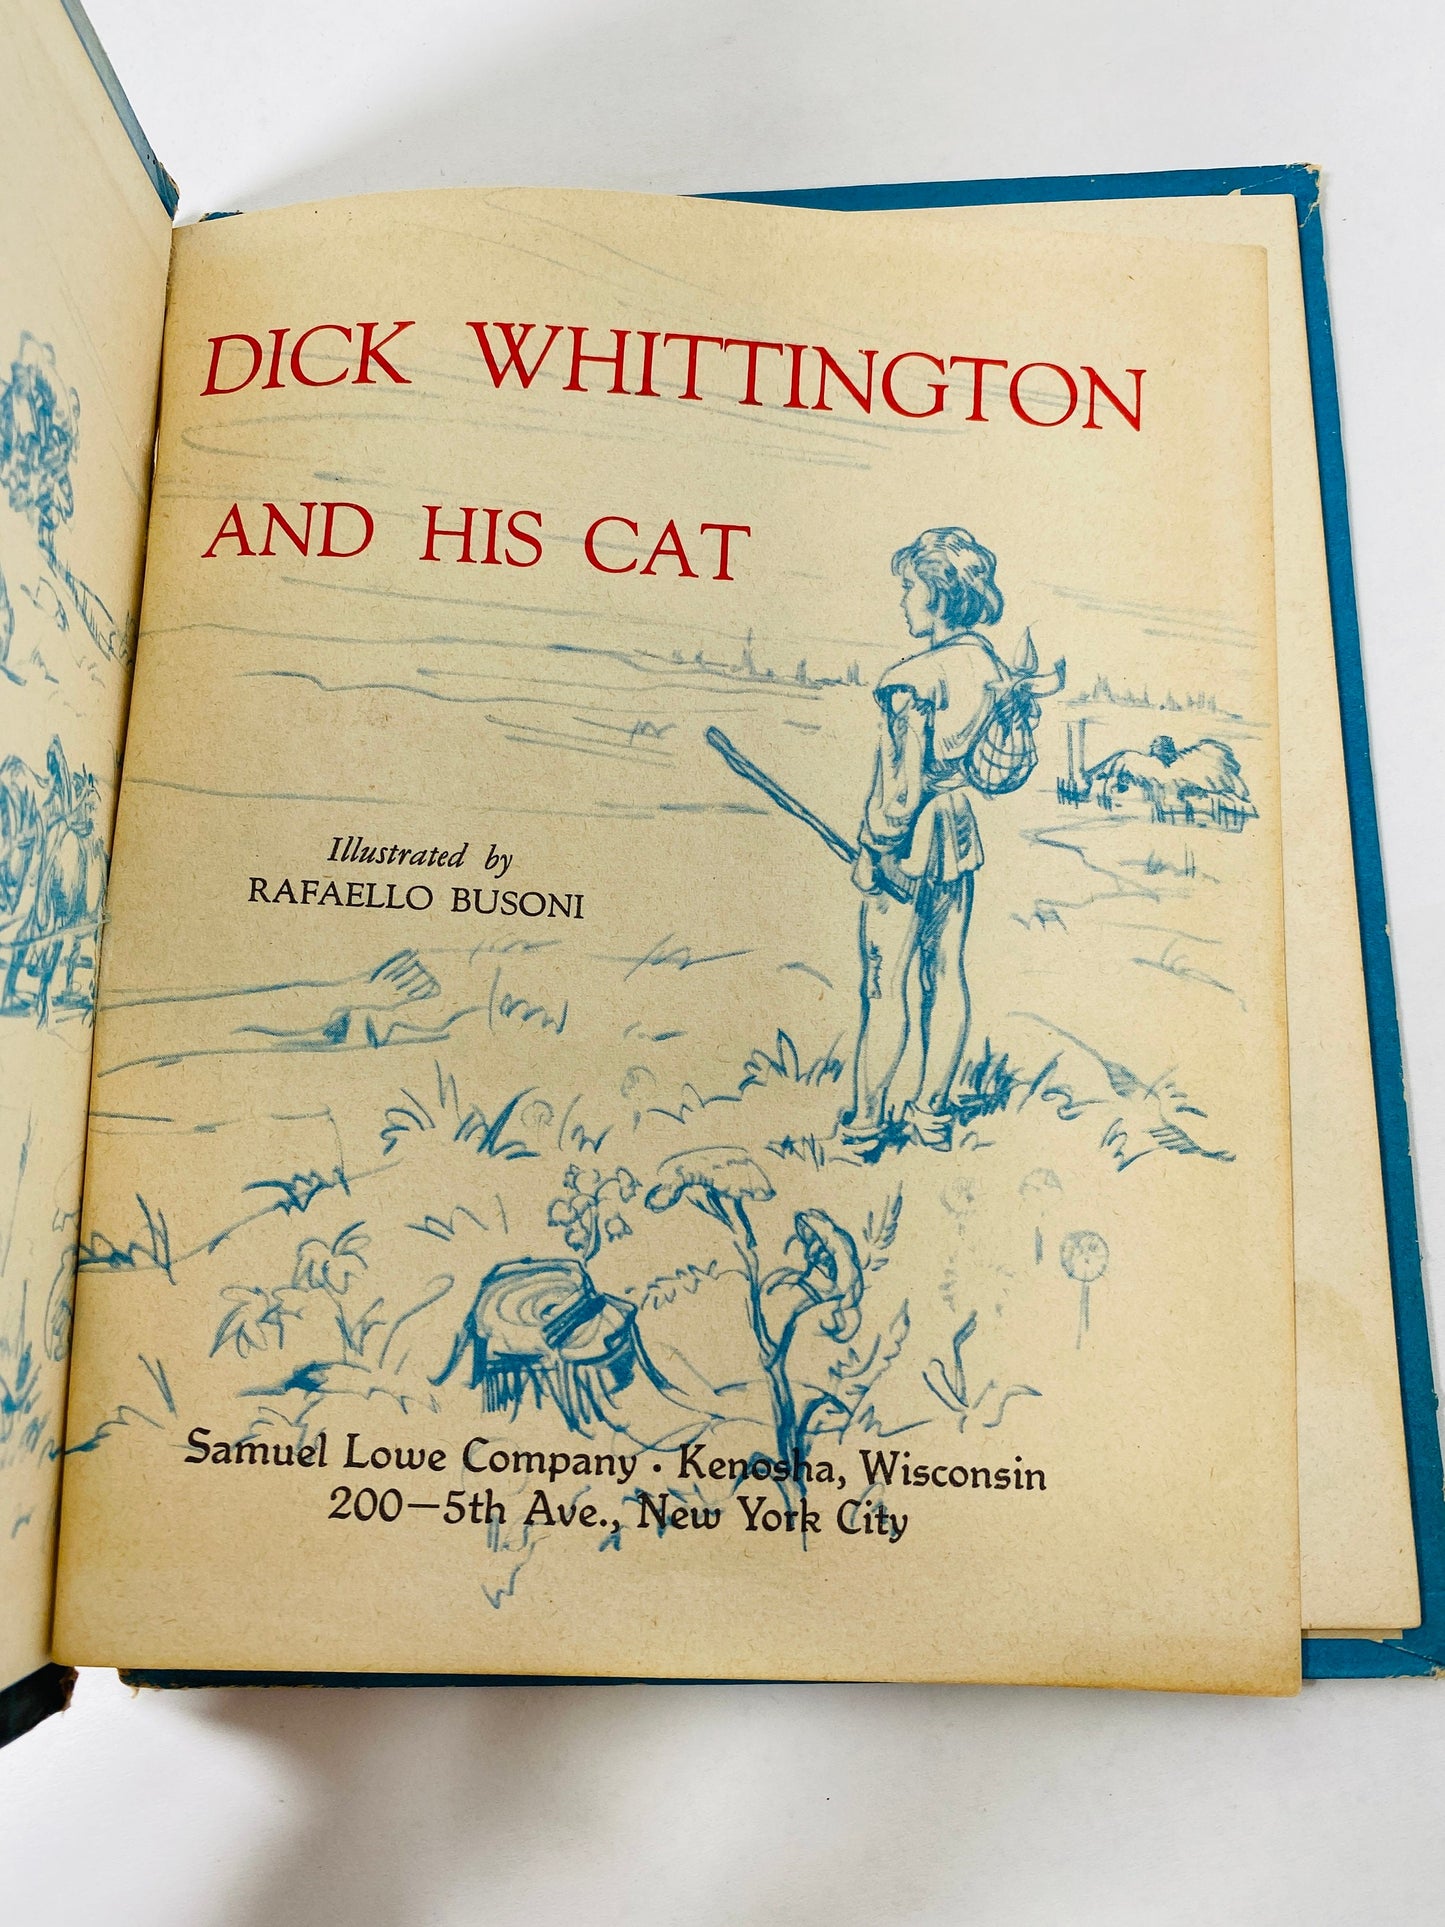 Dick Wittington and his cat Vintage Bonnie book circa 1953 Cat lover, pet lover gift. Blue decor stocking stuffer.